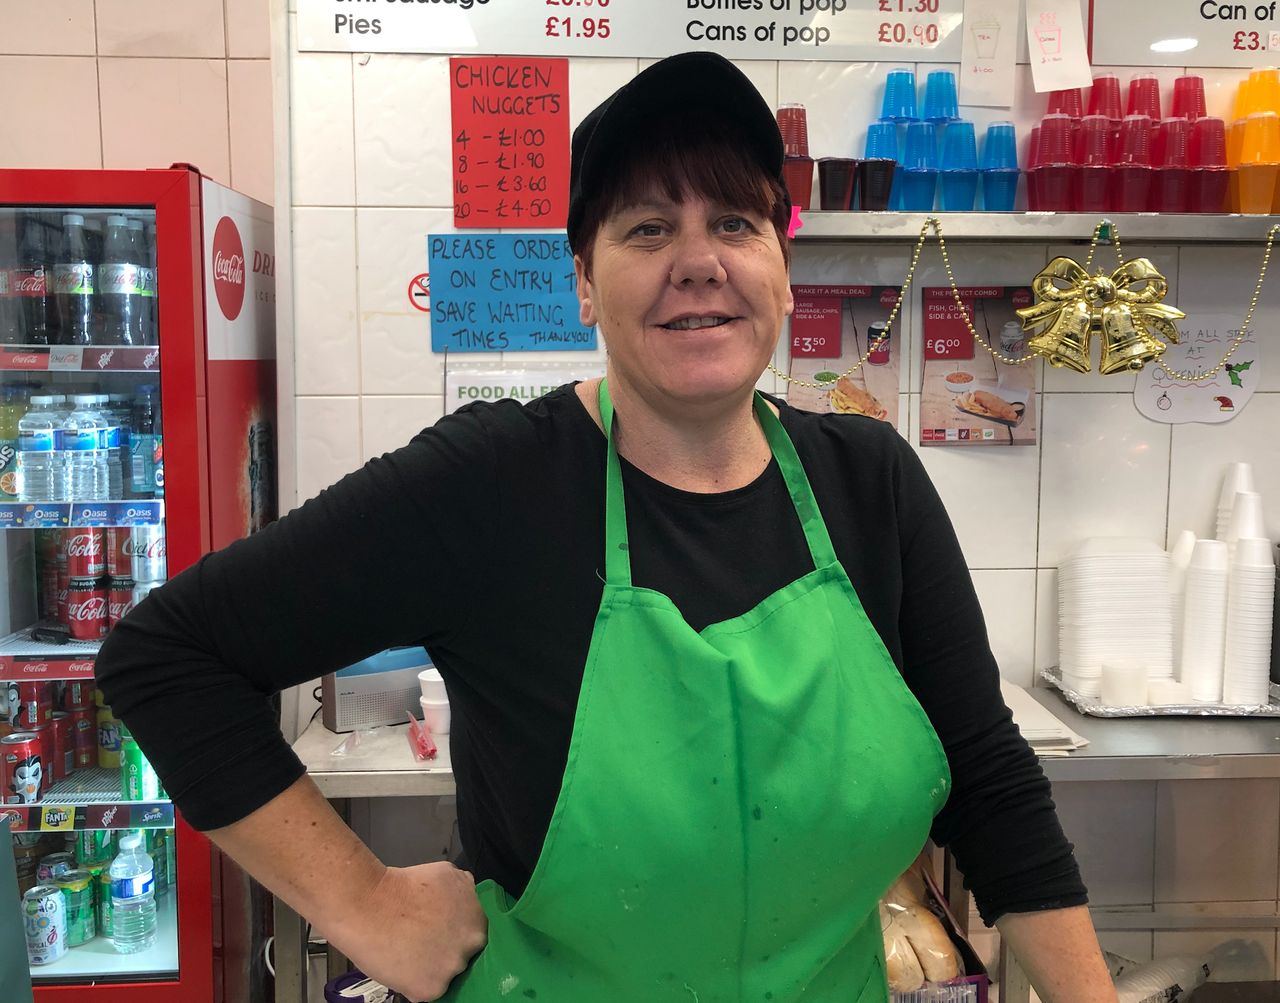 Joanne Norfolk, who works at Queenies Chippy and remembers serving the two boys who were killed